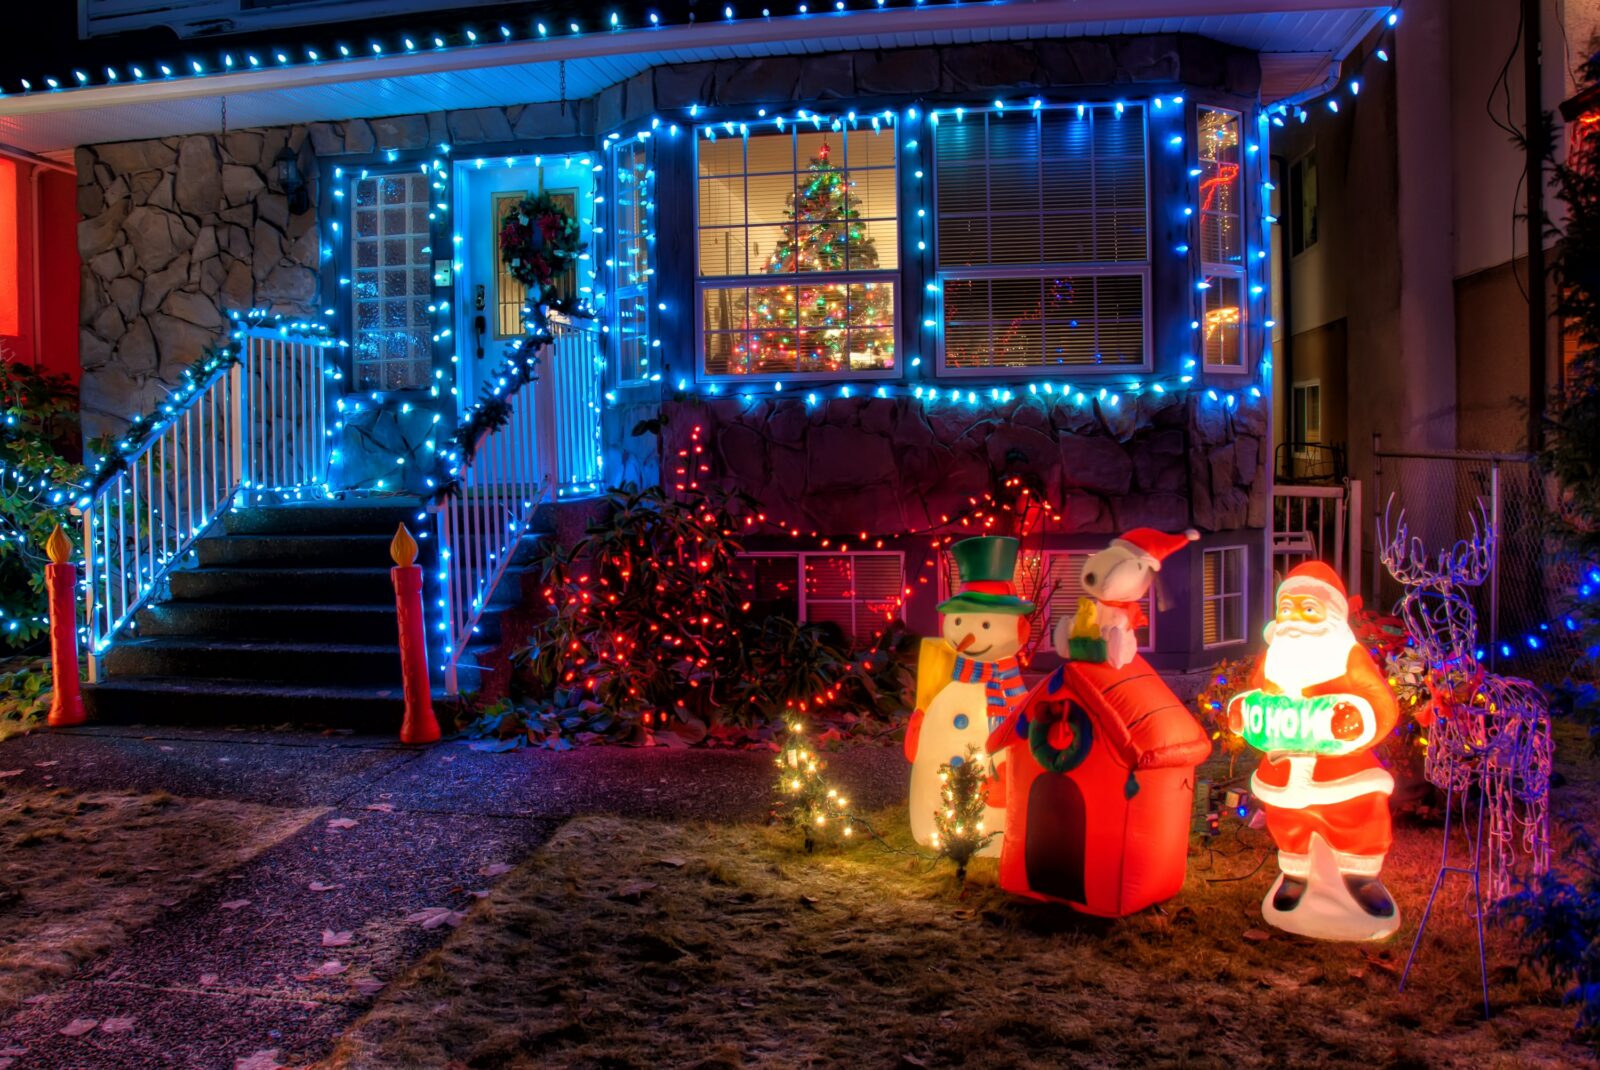 With Philips Hue and these other lights Christmas becomes magical